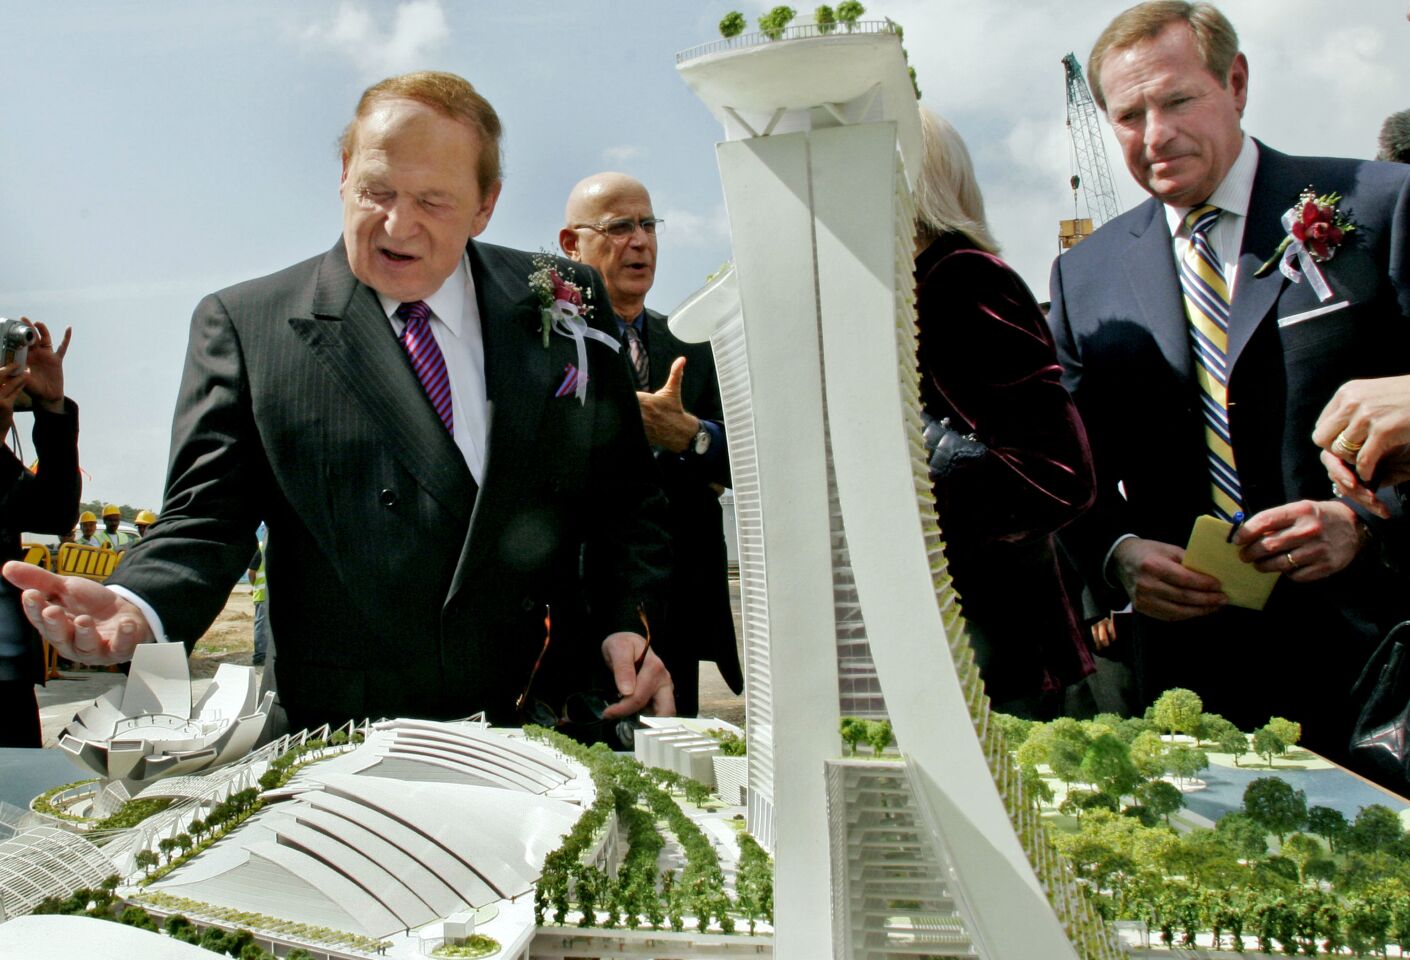 Sheldon Adelson and others look at a model of a resort.